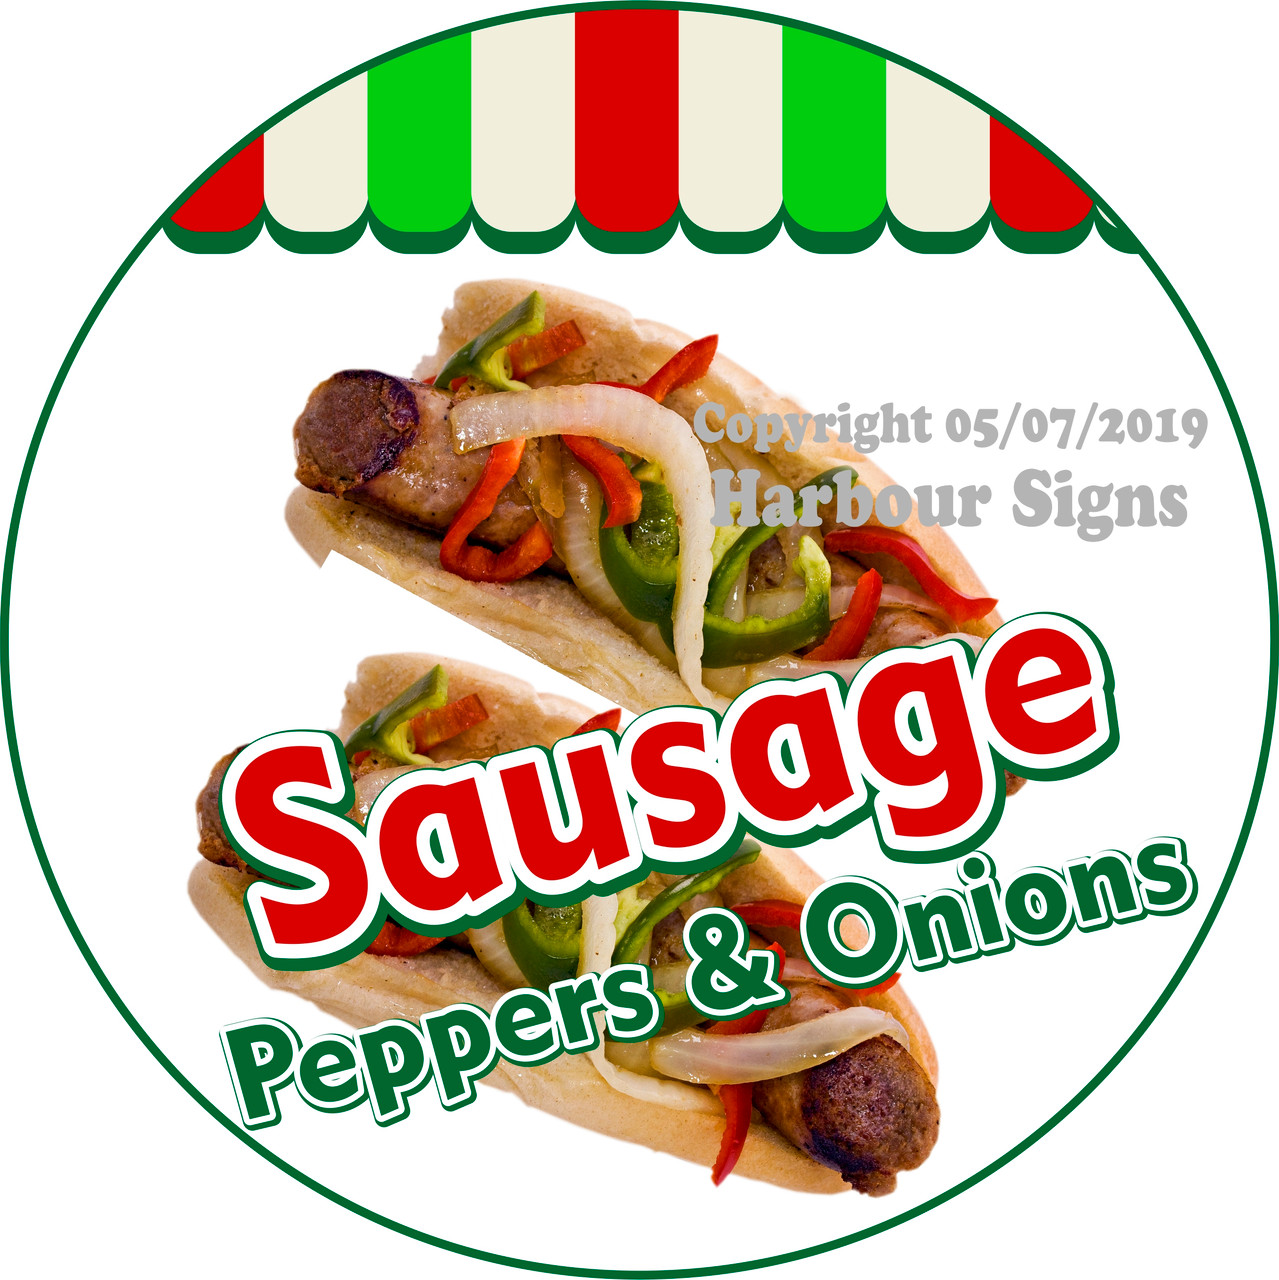 Sausage Peppers Onions Concession Food Truck Vinyl Menu Sticker Decal 14" 